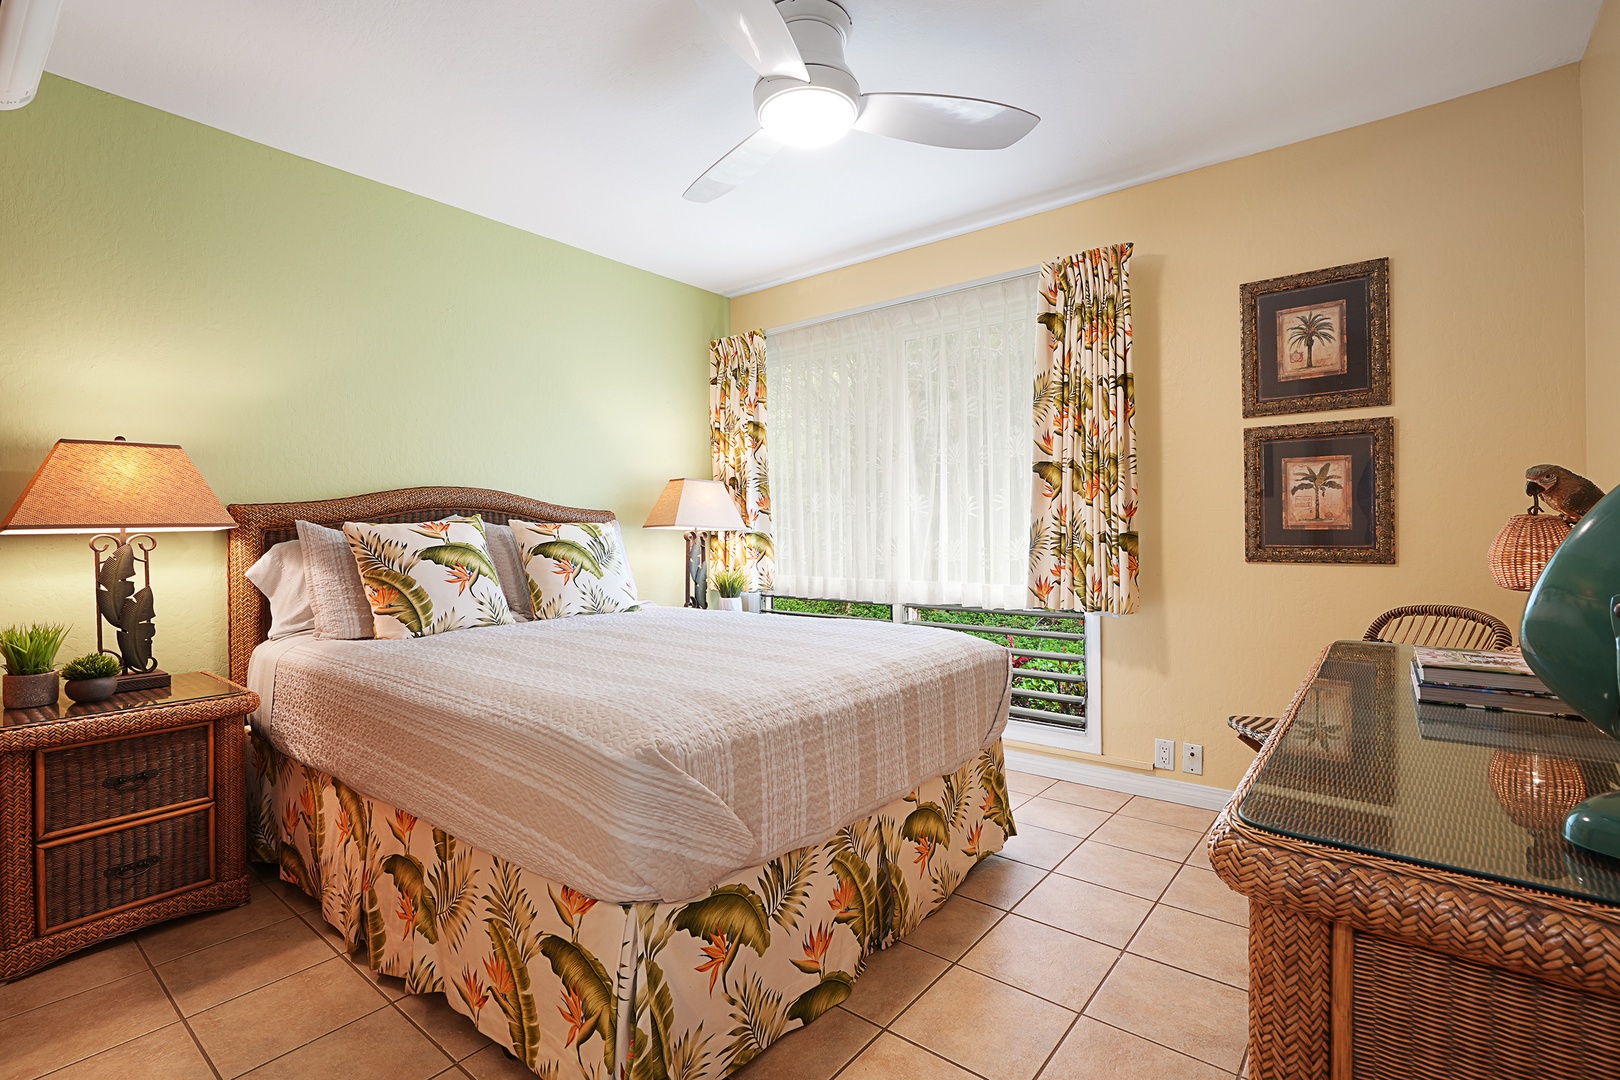 Koloa Vacation Rentals, Kauai Birdsong at Poipu Crater - The guest bedroom has a queen bed, ceiling fan and split AC.